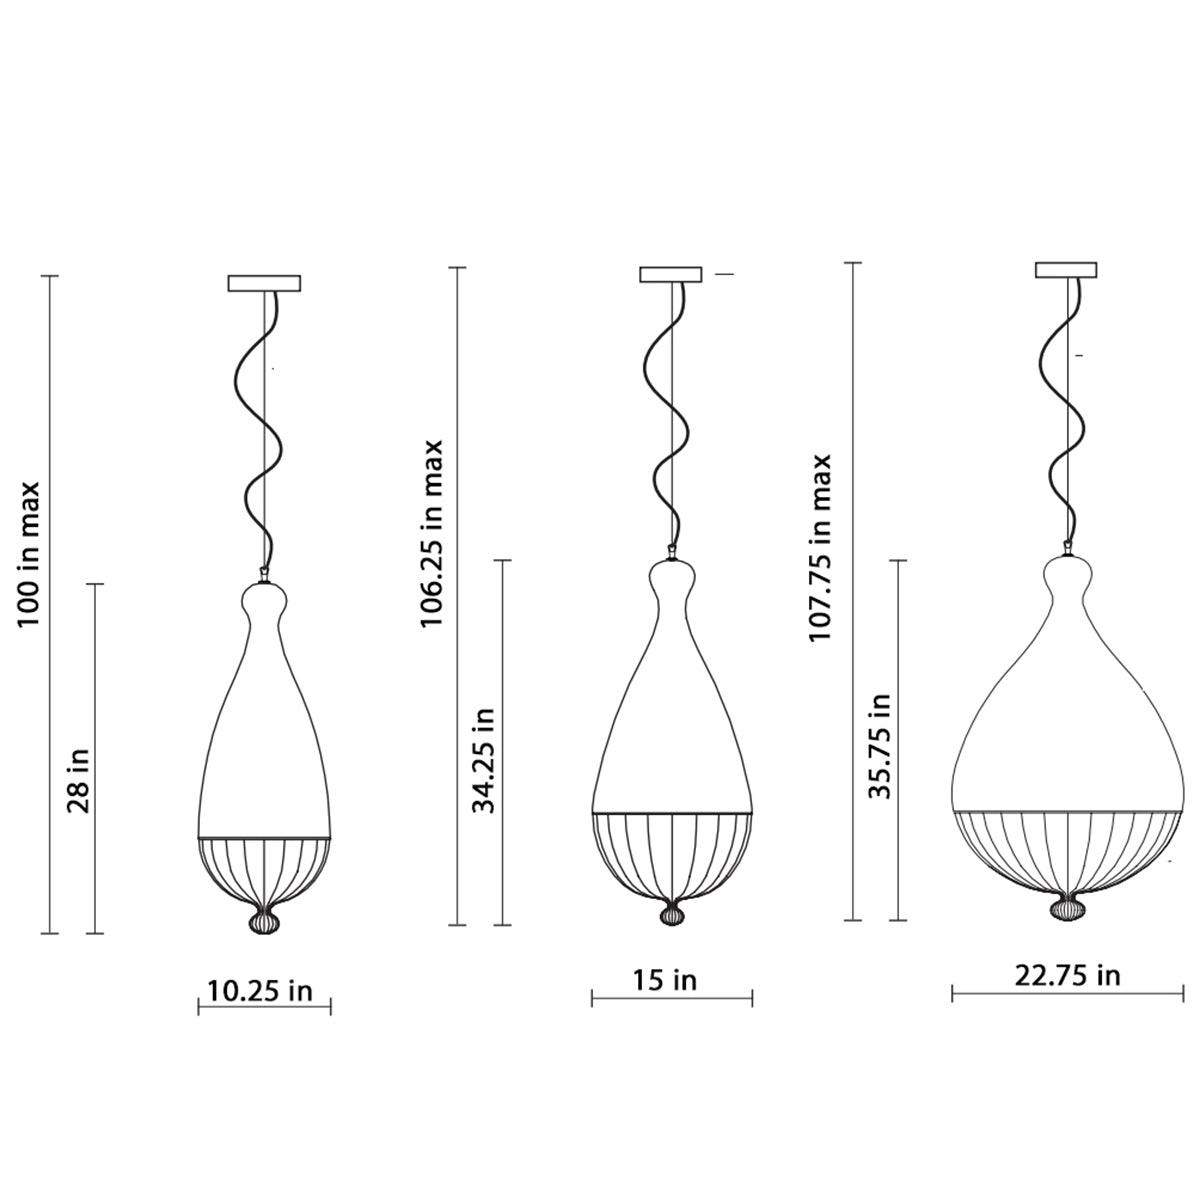 Le Trulle Pendant Light Specifications